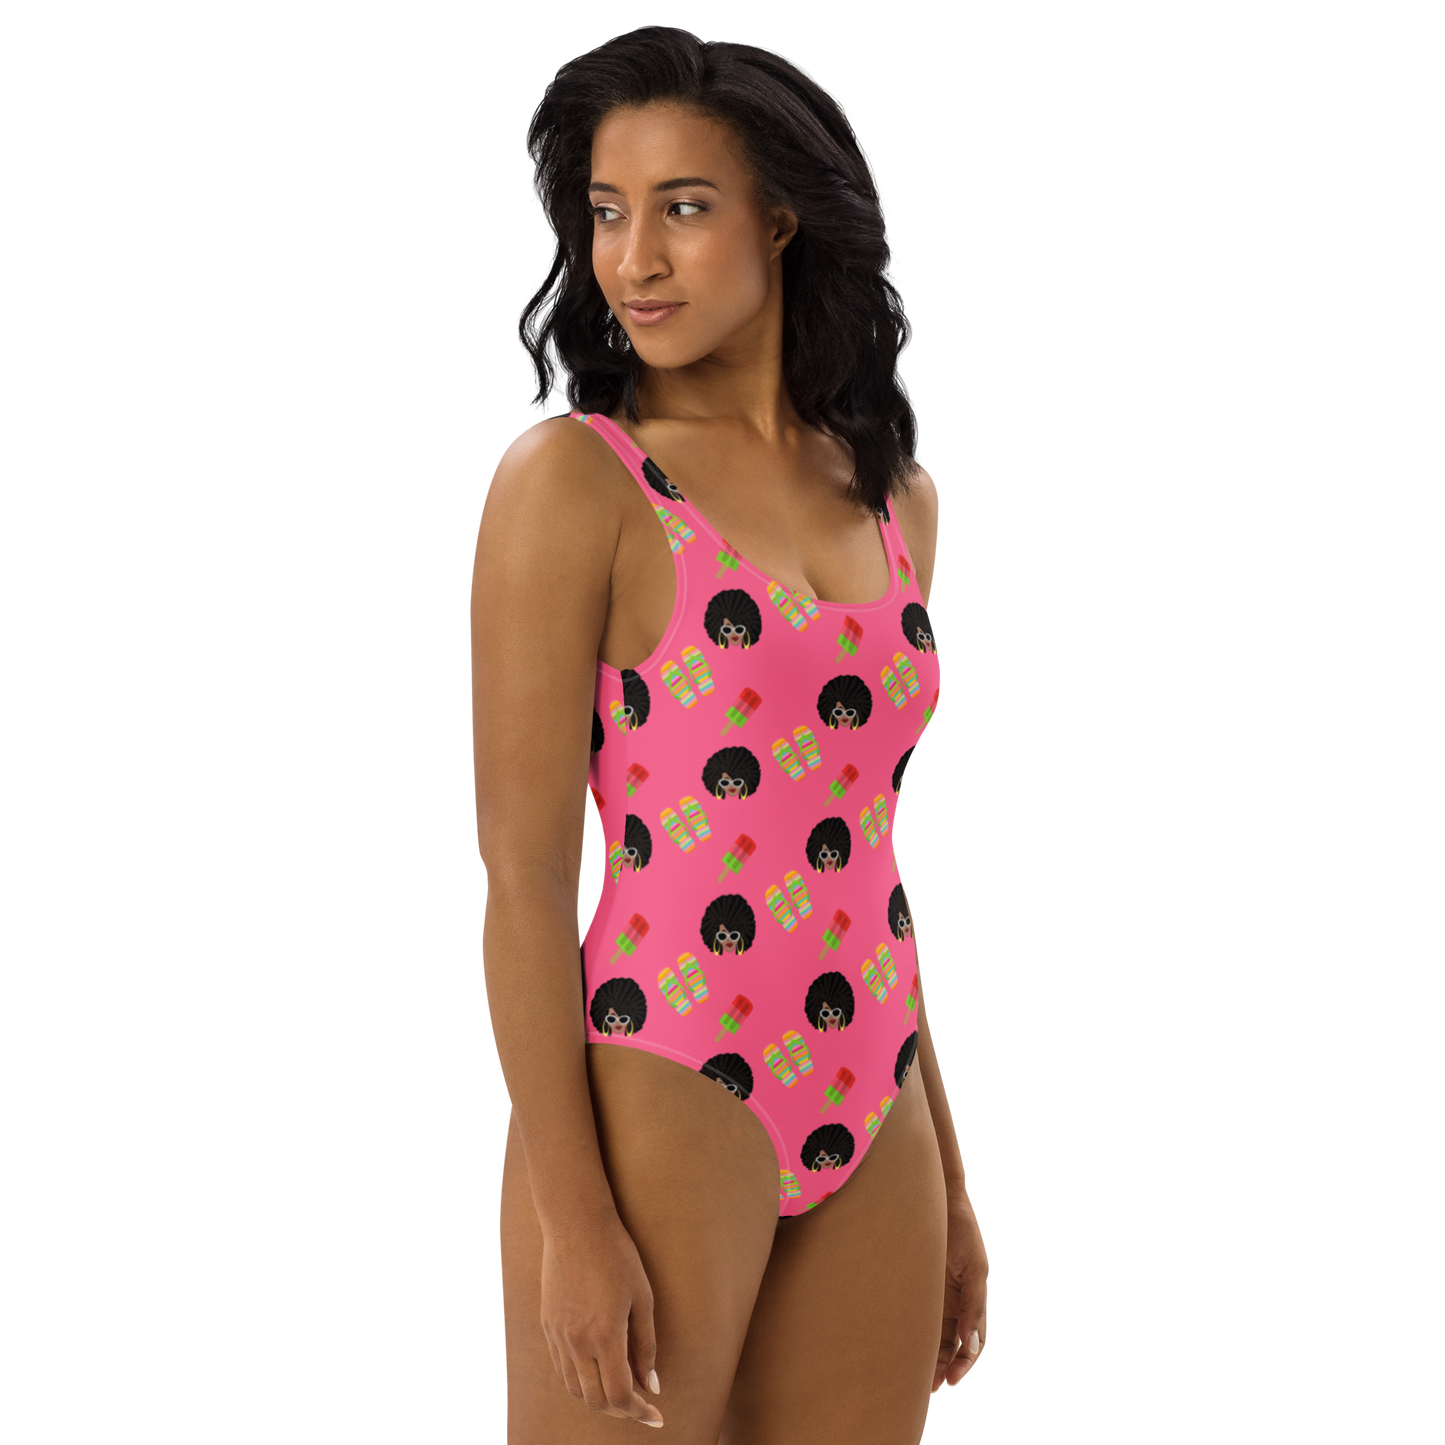 Chicy Girl Summer One-Piece Swimsuit in Brink Pink